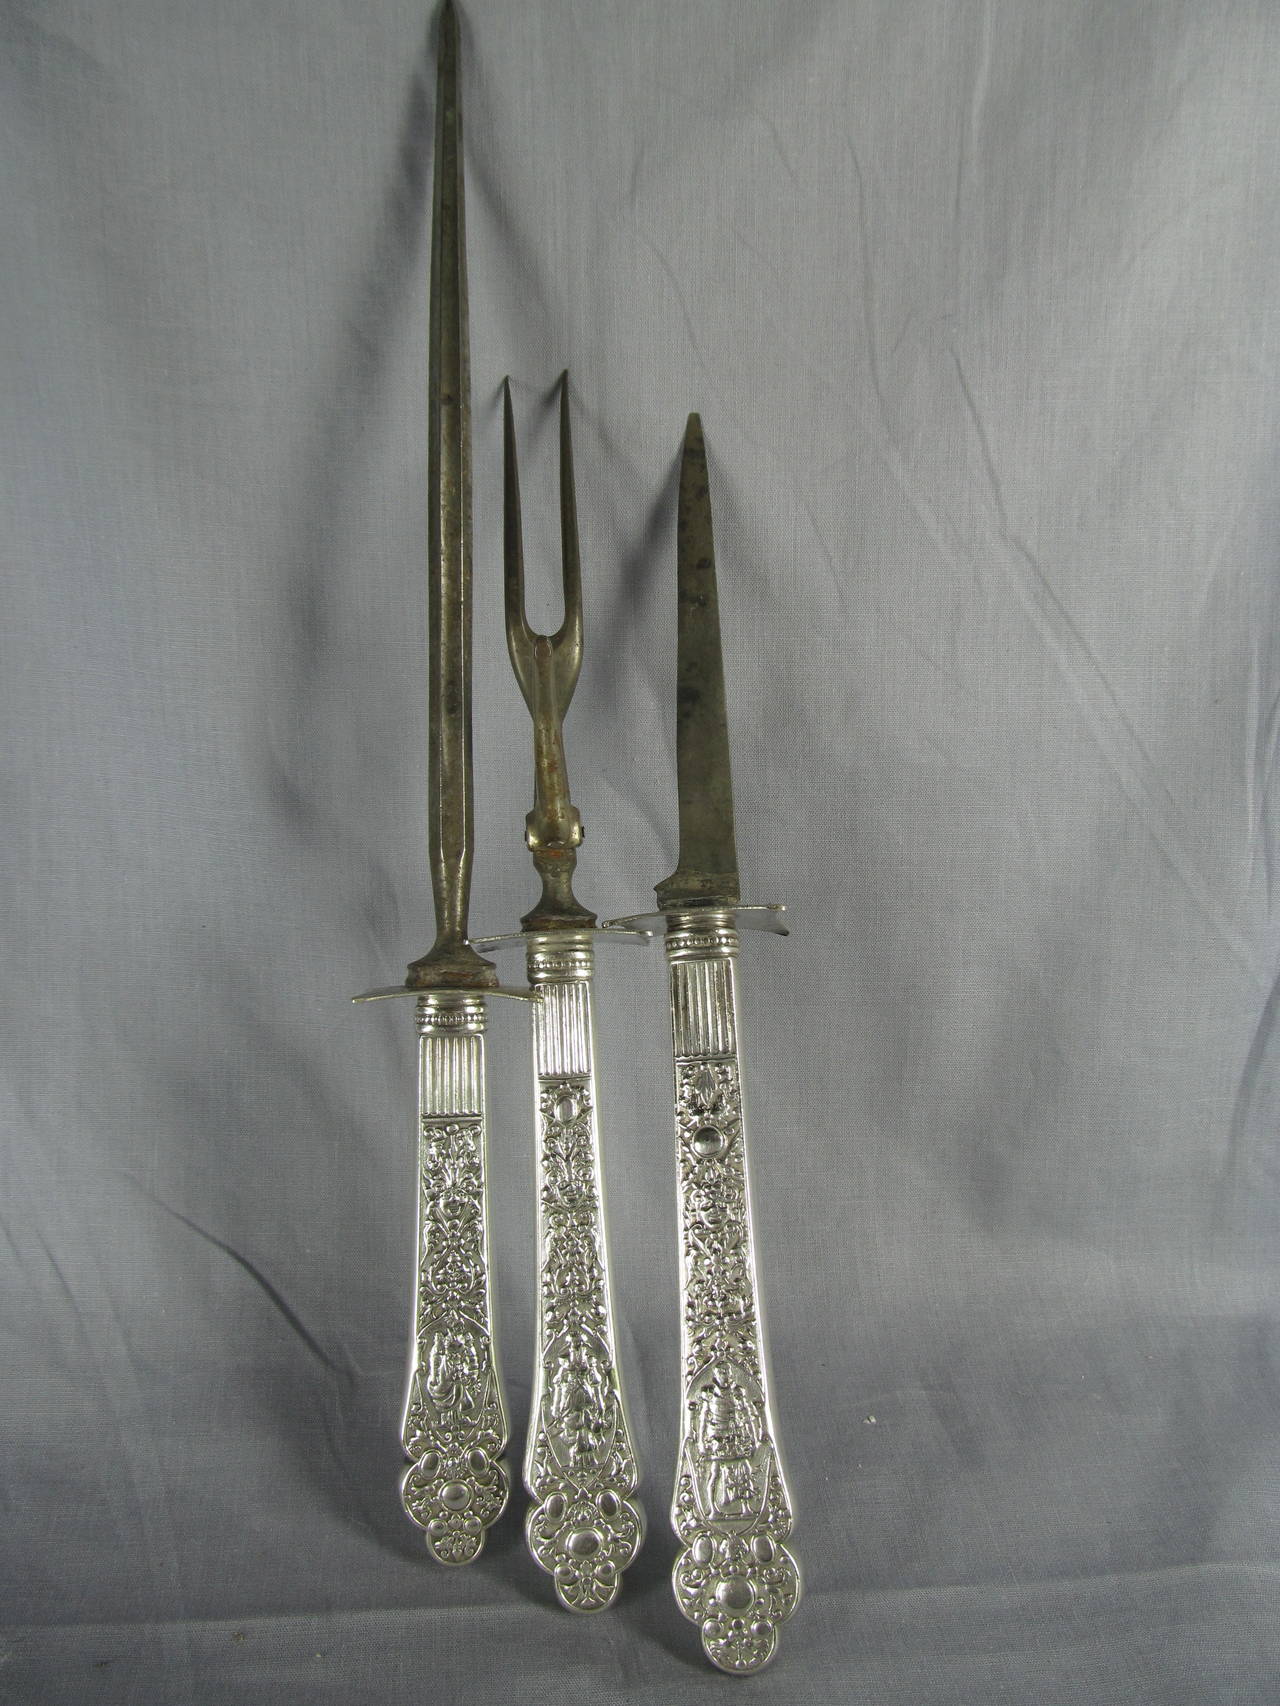 Three-piece carving set by Gorham. Old Medici pattern, discontinued in 1991. No monograms. Only hand polished.